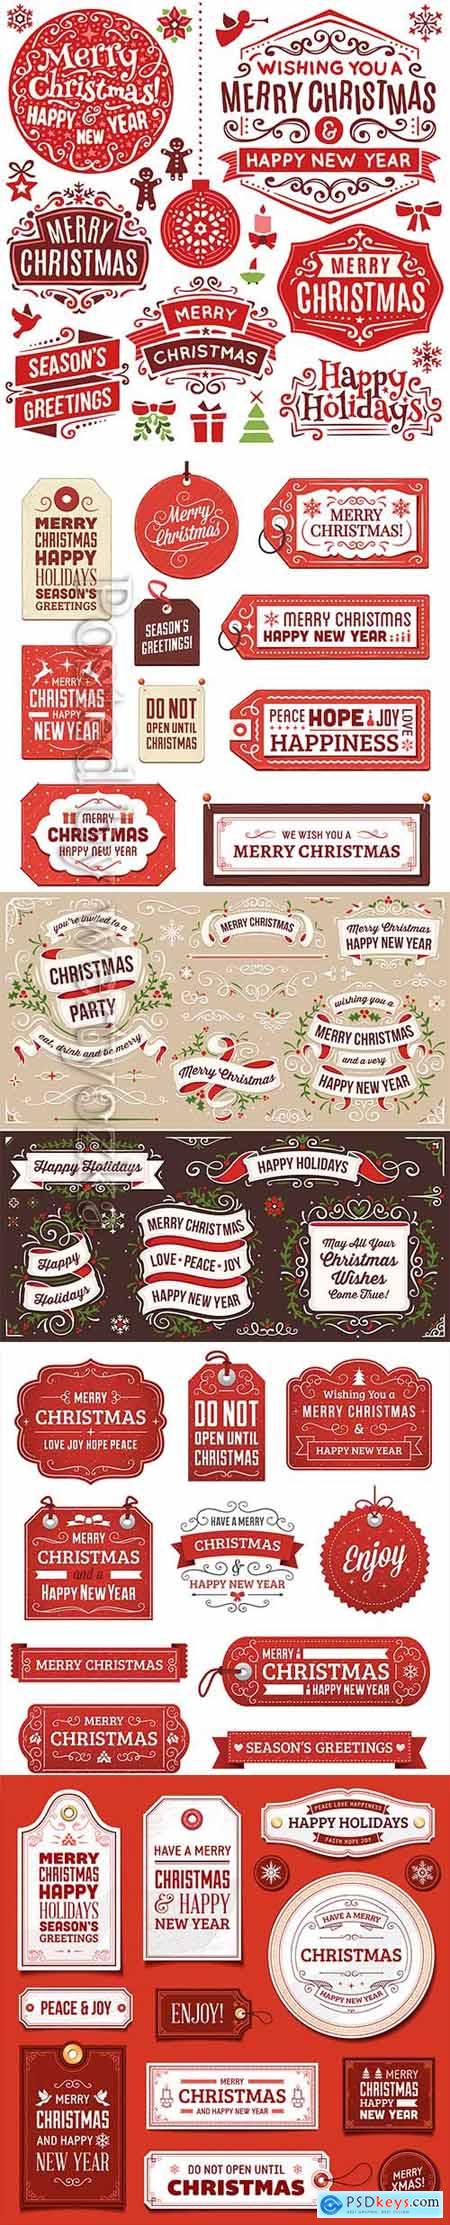 Collection of christmas vector design elements